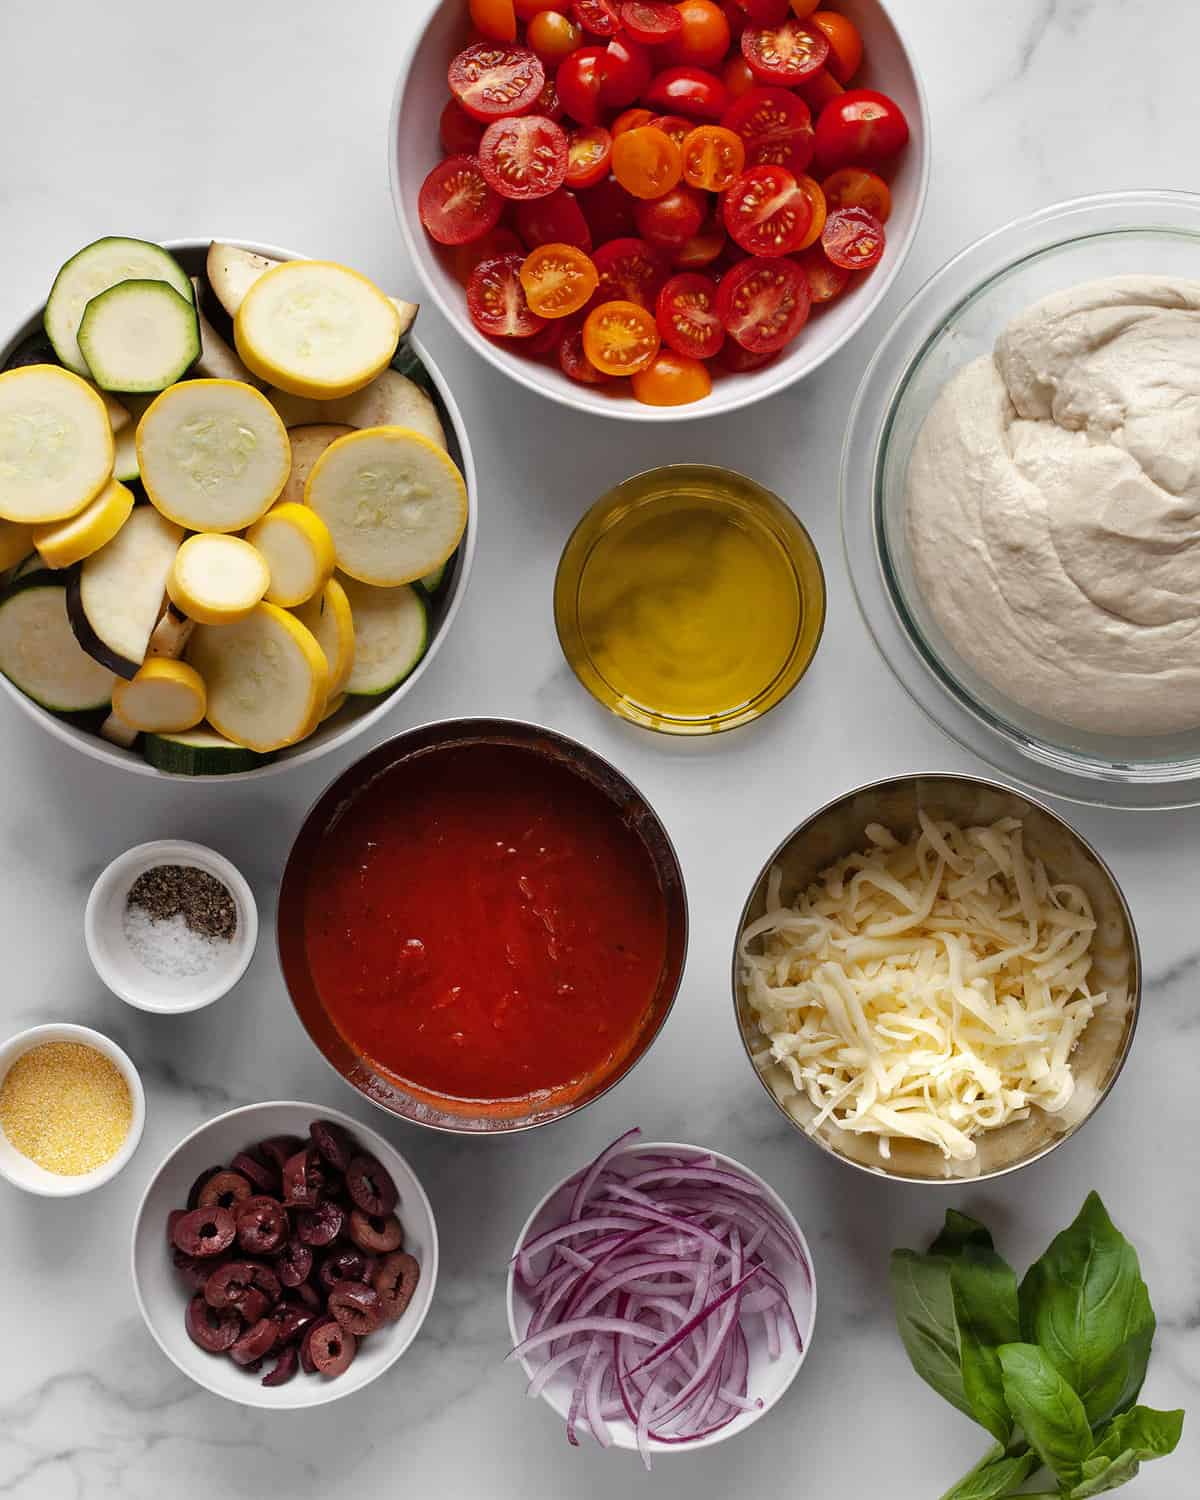 Ingredients including pizza dough in a bowl, vegetables, sauce, cheese, olives, onions, basil and olive oil.